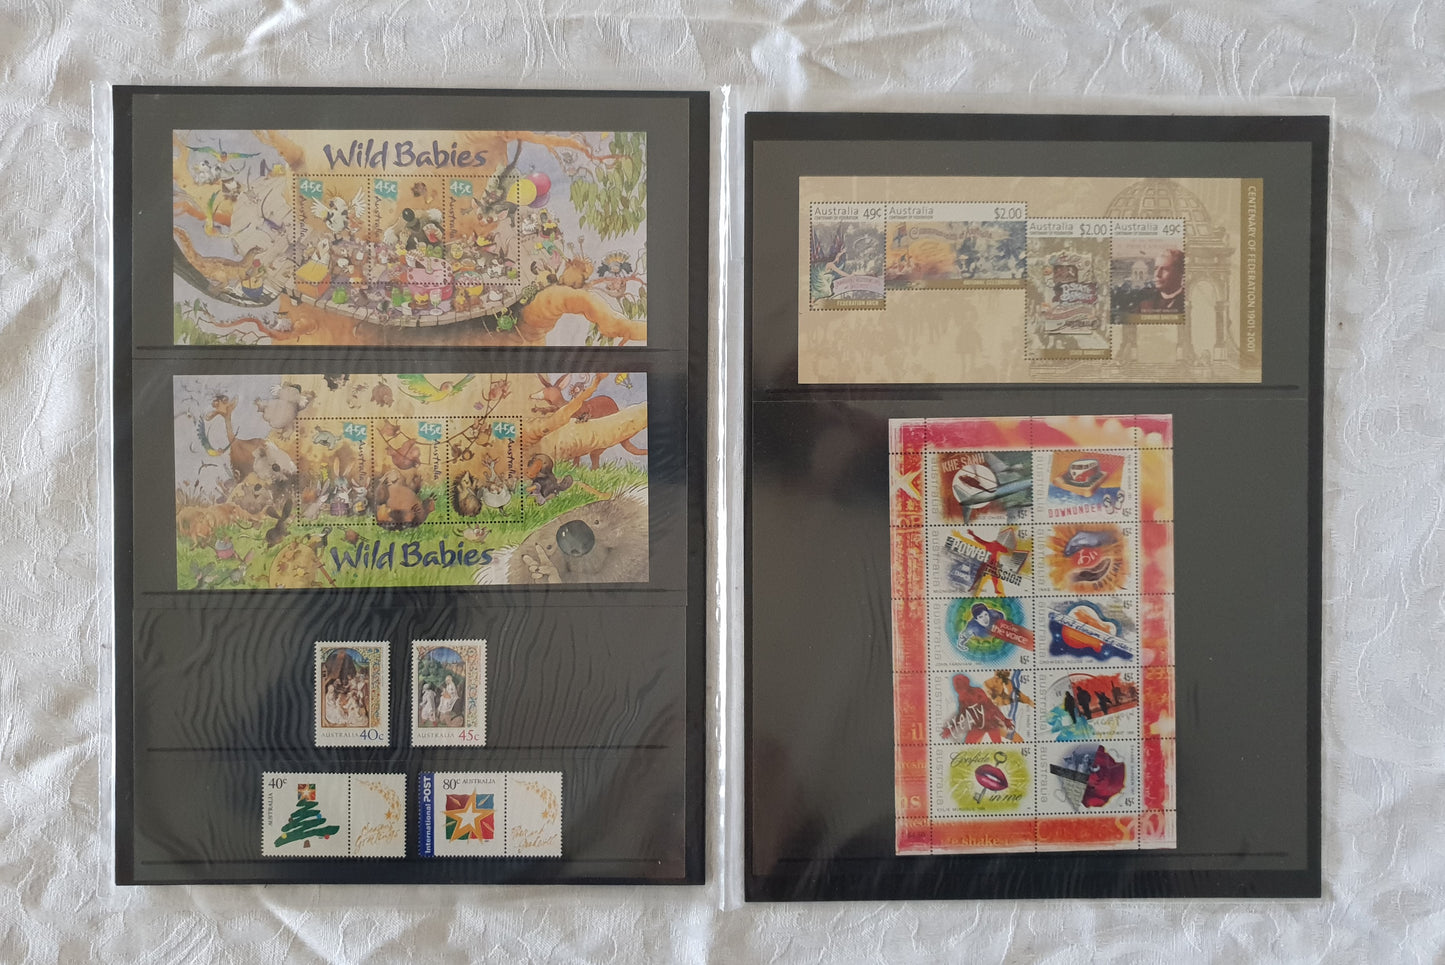 2001 Collection of Australian Stamps